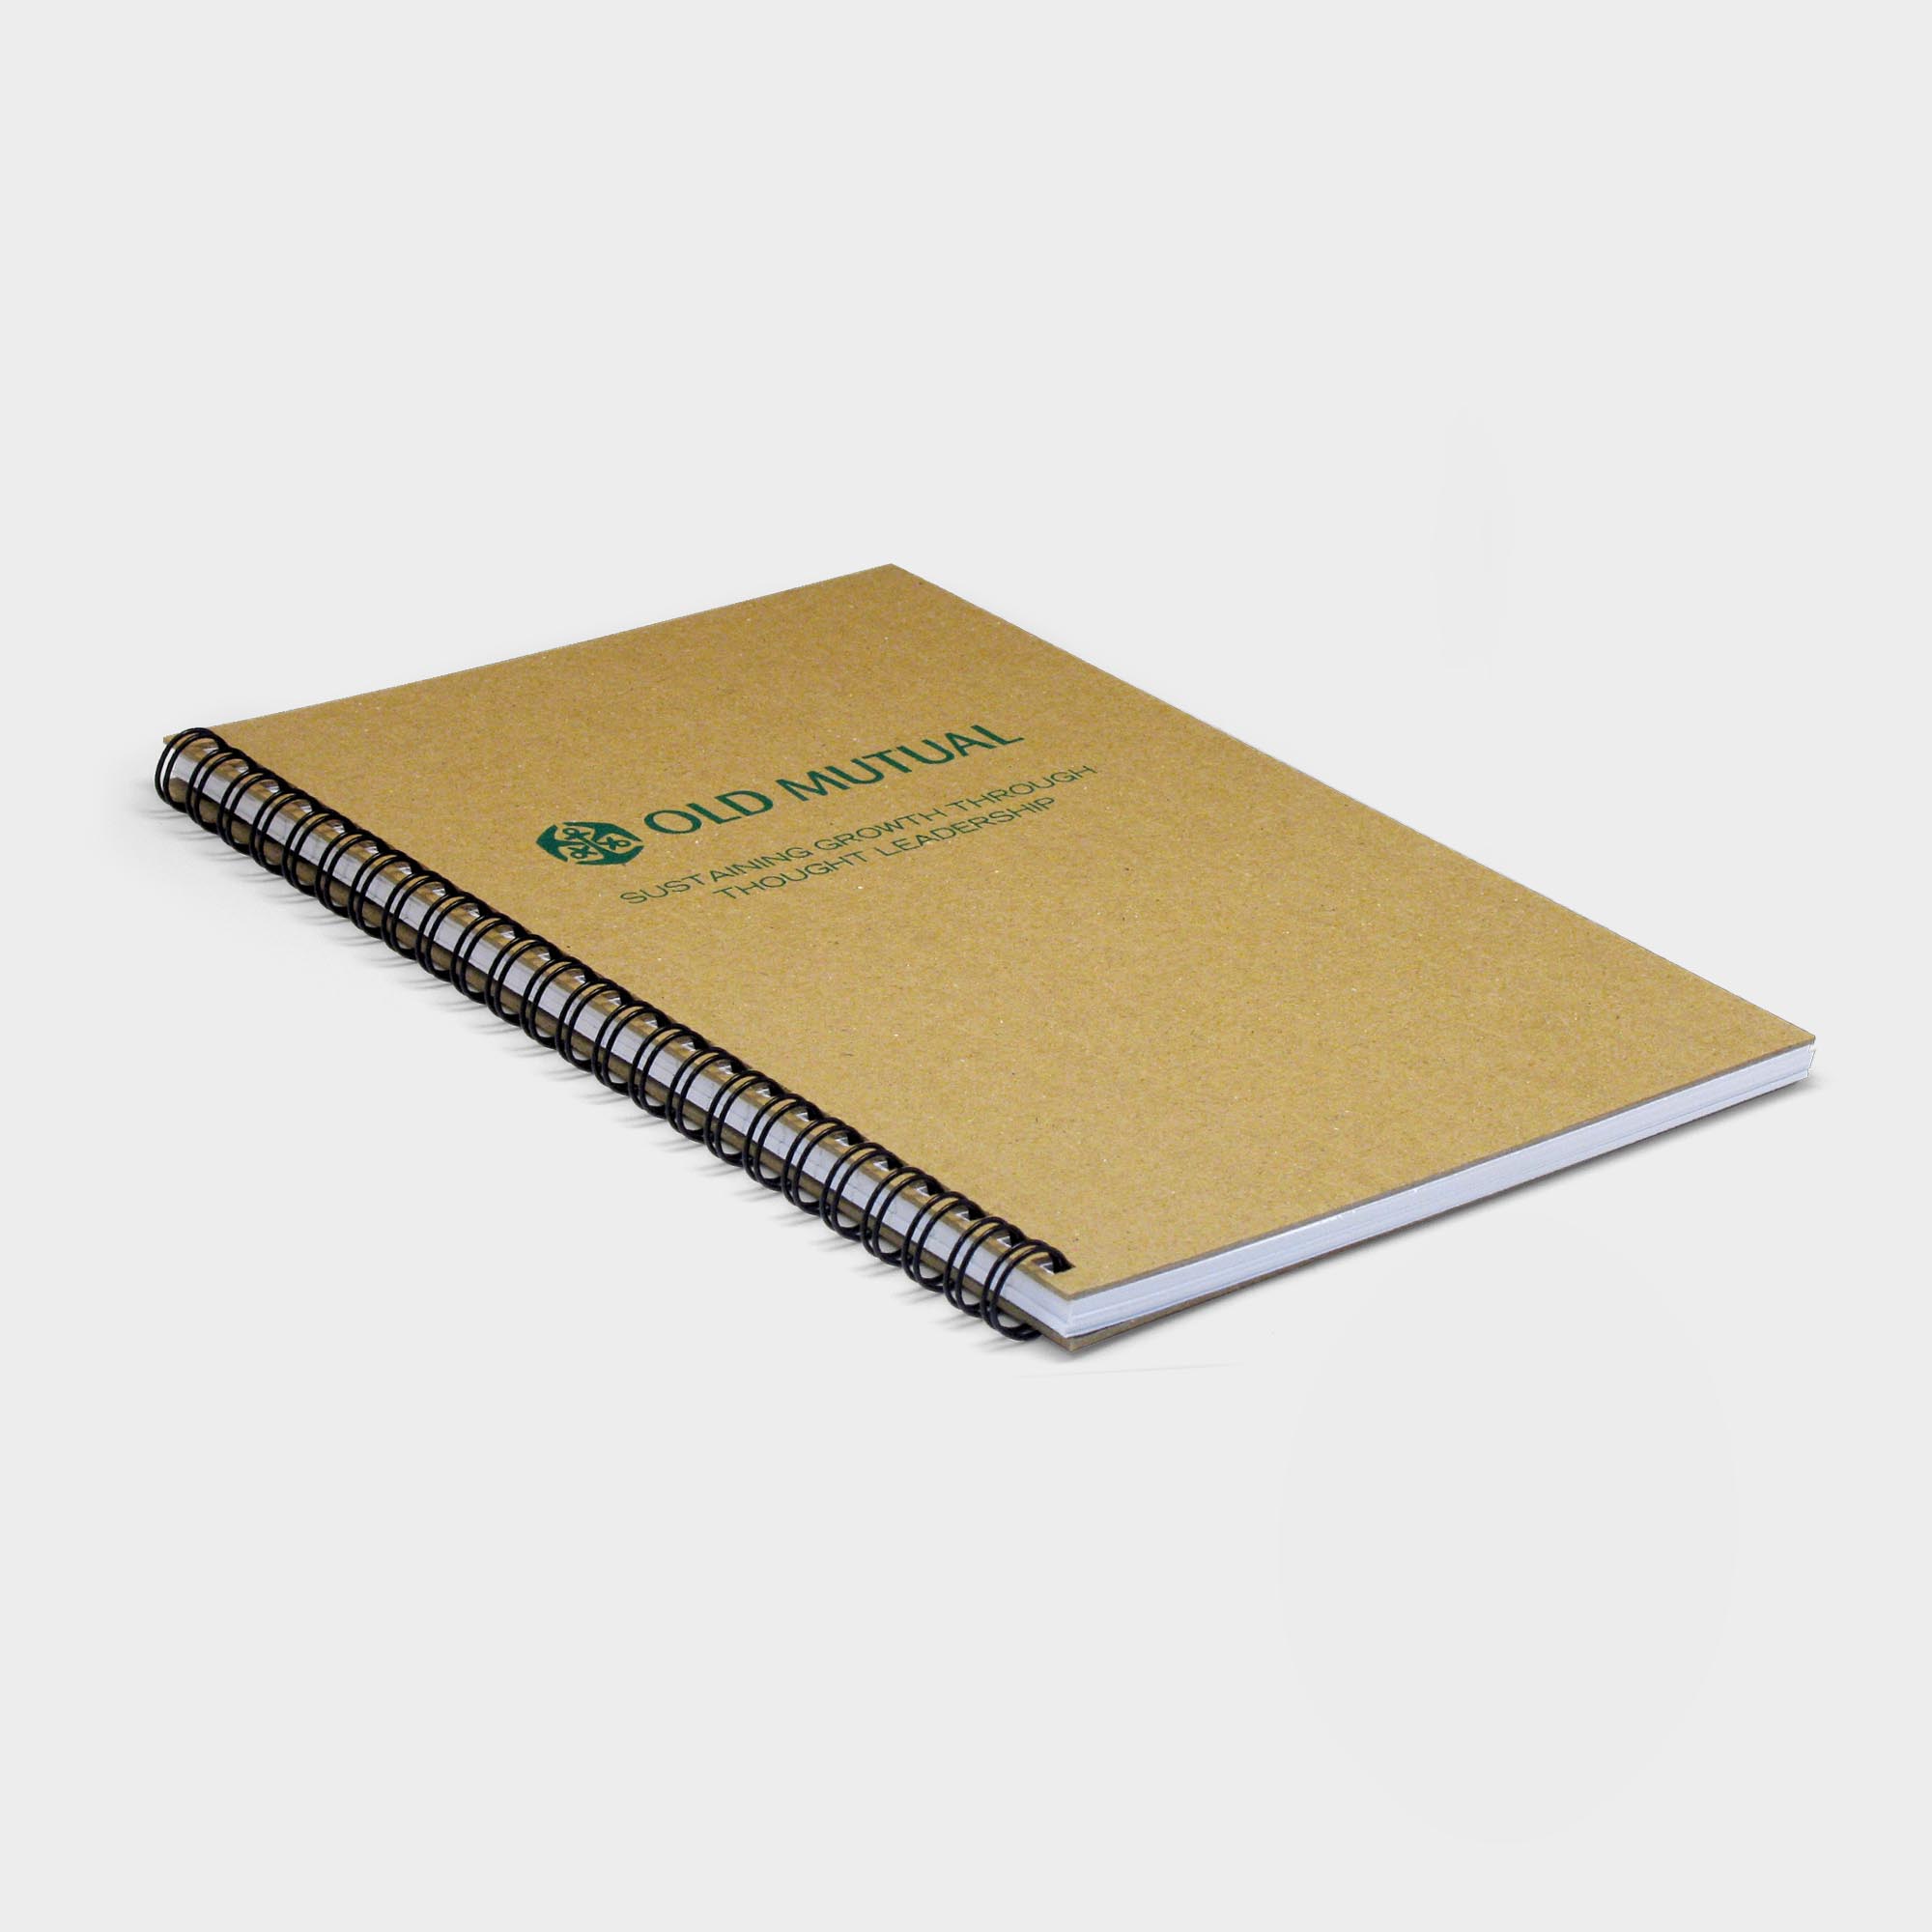 The Green & Good Wirebound Notebook is made from recycled paper - size A4. The front and back cover is made from recycled cardboard (1200 microns), the sheets are 80gsm. Comes wirebound with 50 sheets as standard. Please contact us if you require a bespoke number of sheets.